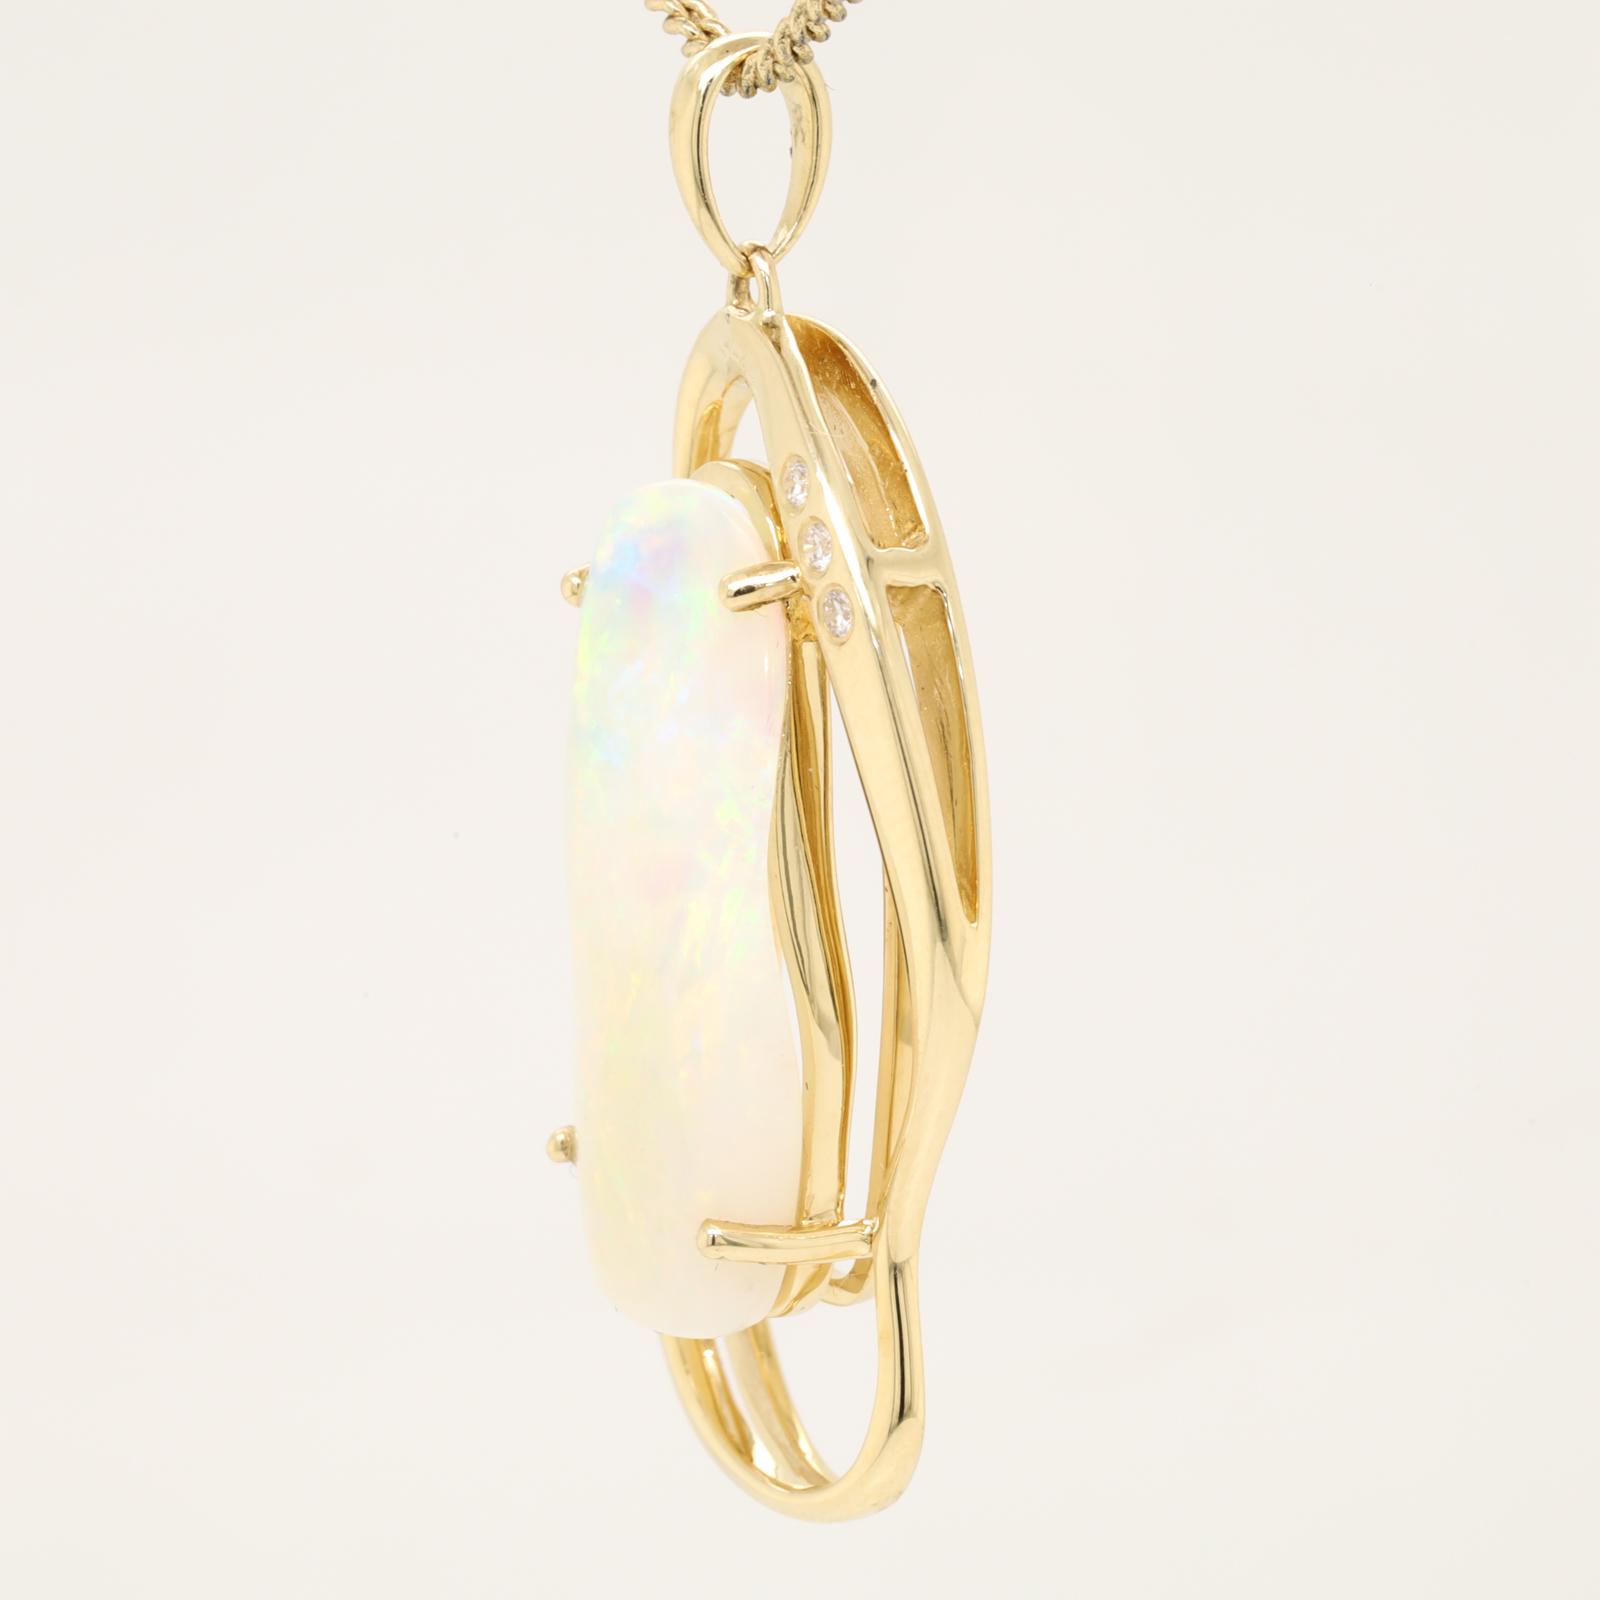 Blue Green Pink Yellow Gold Solid Australian Crystal Opal Necklace Pendant with Diamonds